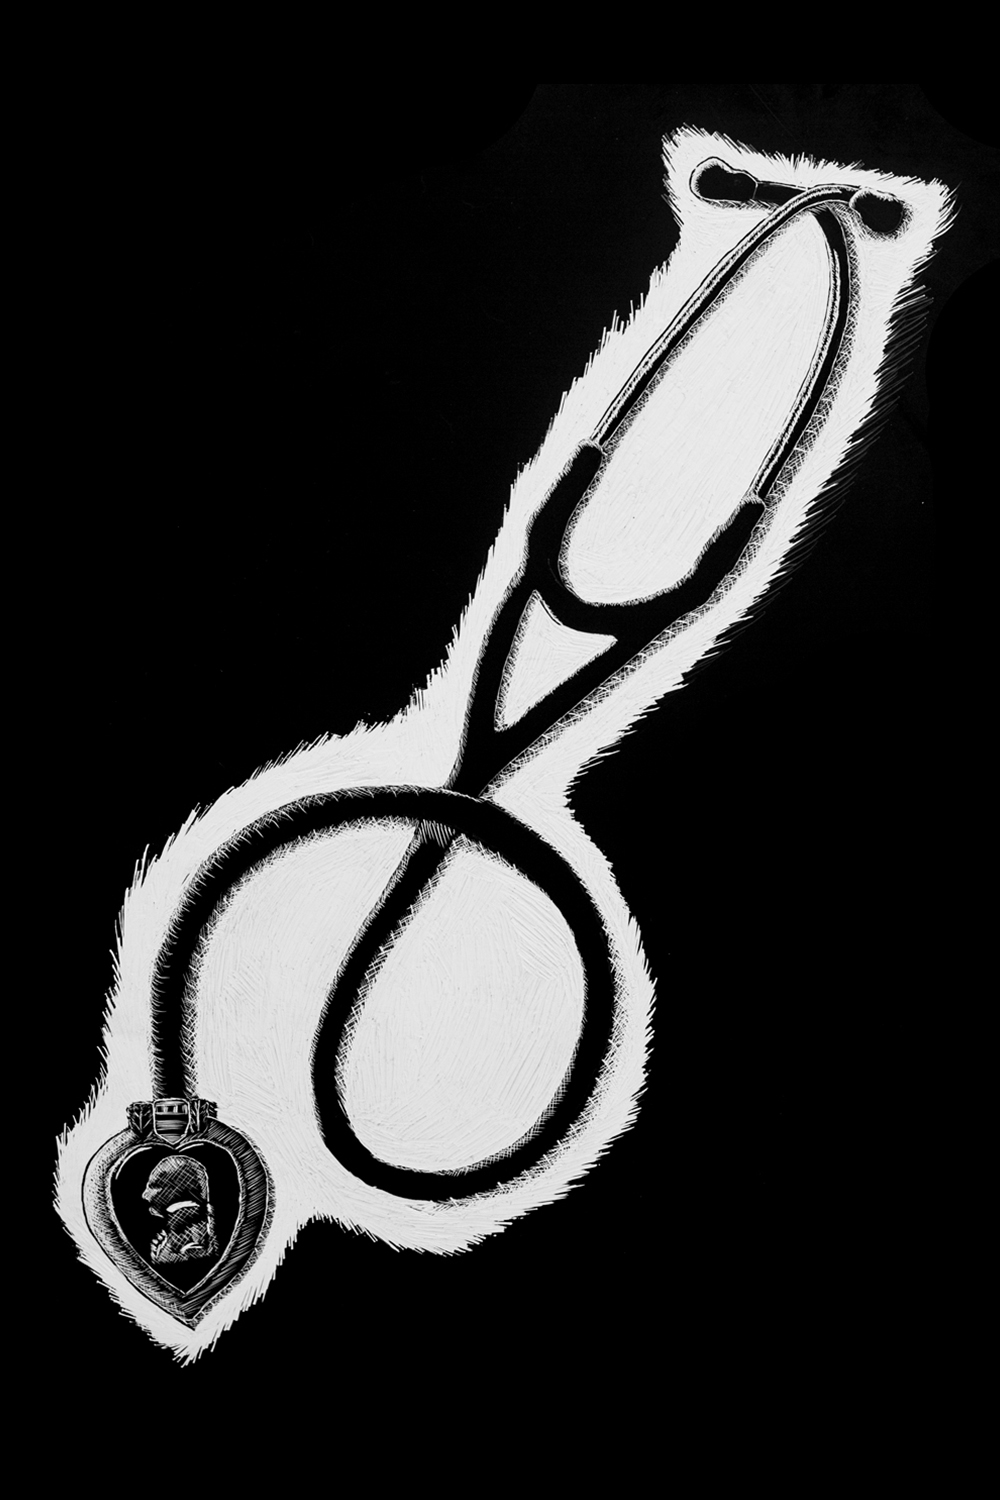 Scratchboard illustration of a stethoscope with a purple heart medal in the place of its diaphragm.